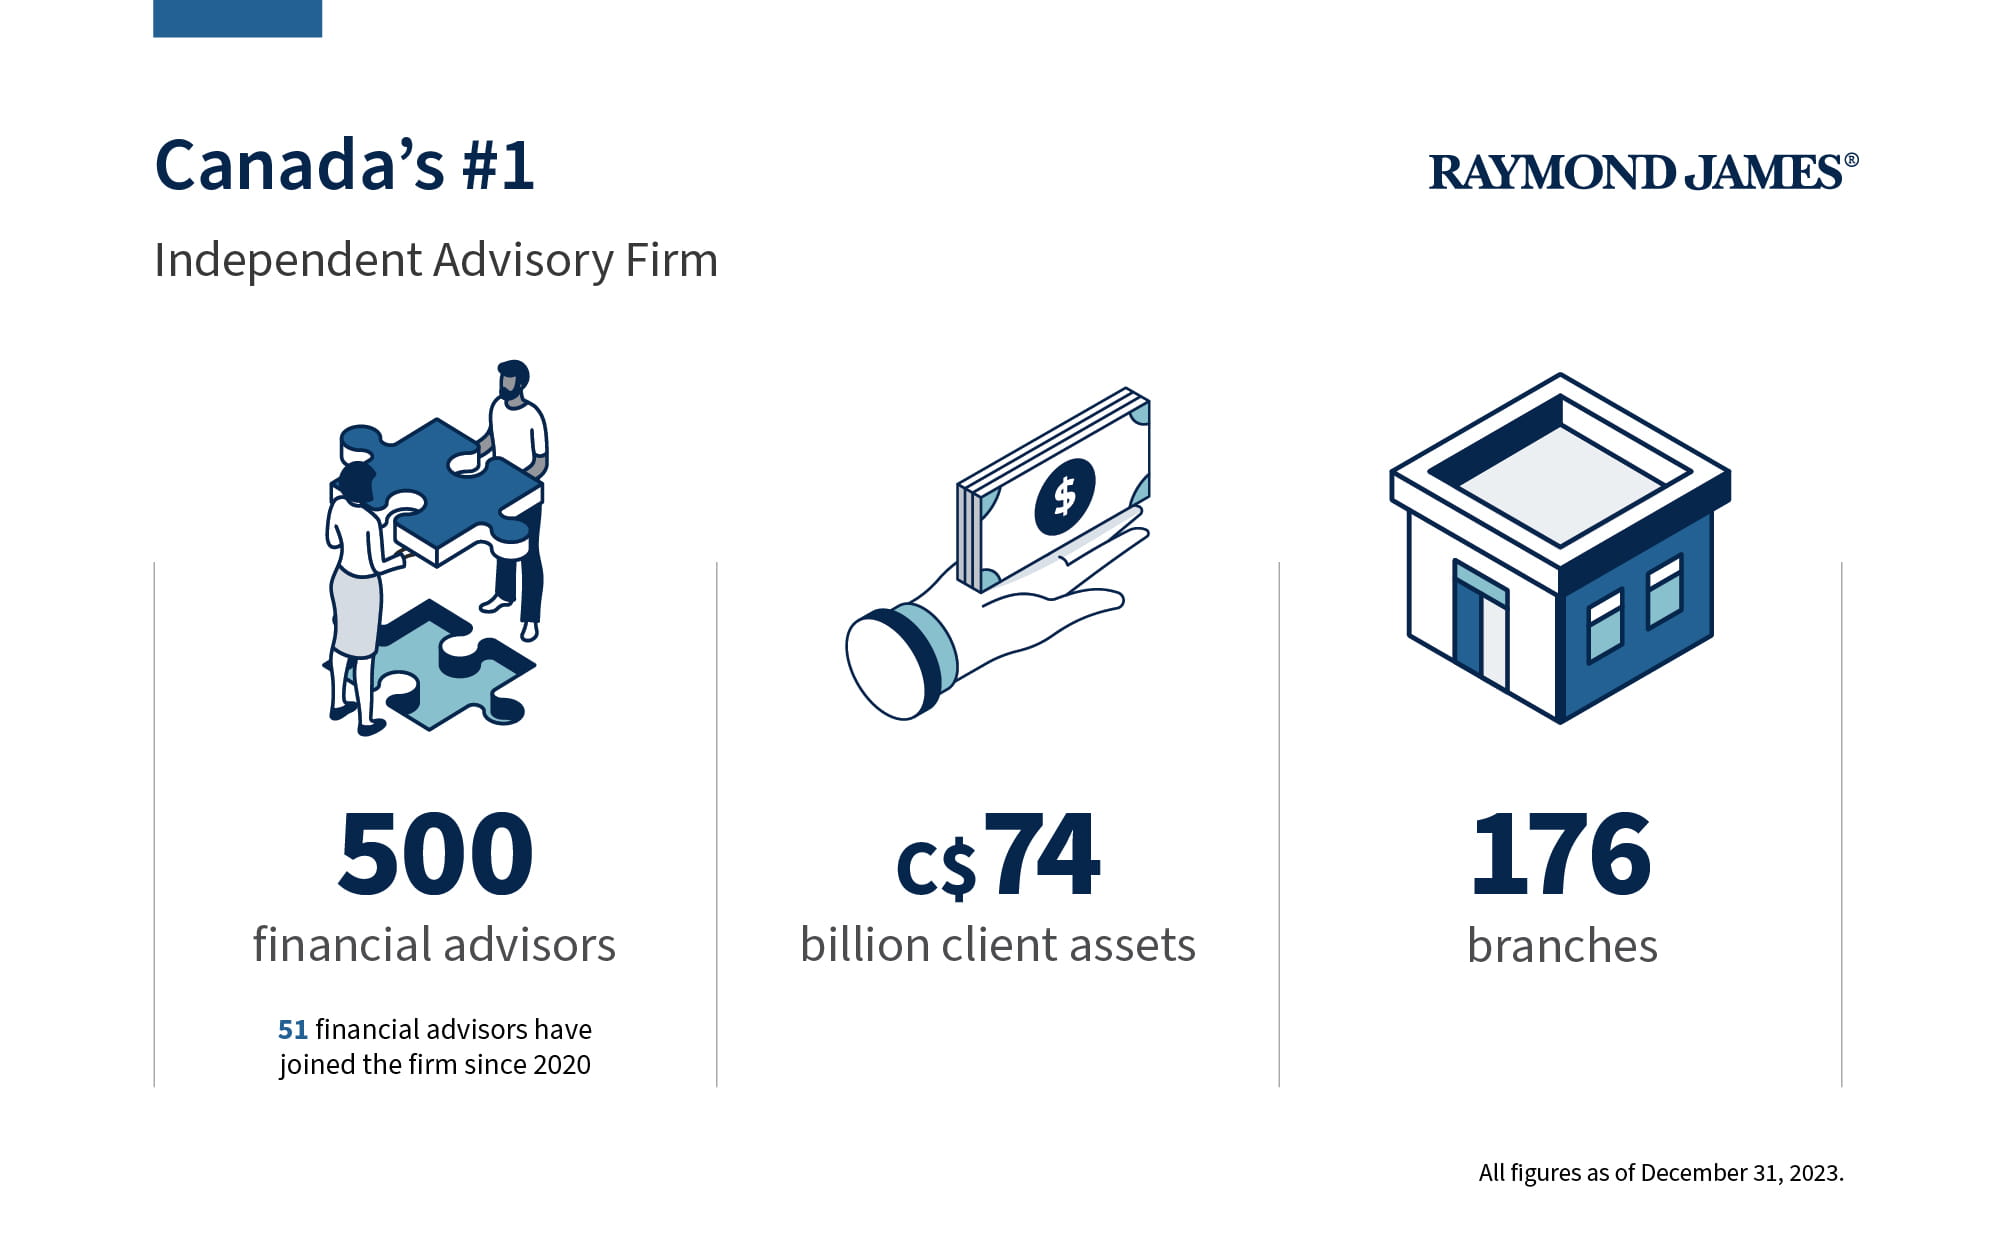 Raymond James at a glance. Canada's #1 Independent Advisory Firm. 502 financial Advisors 9 Financial advisors have joined RJ in fiscal 2022 C$68.9 B client assets (as of Dec 31, 2021), 163 Branches